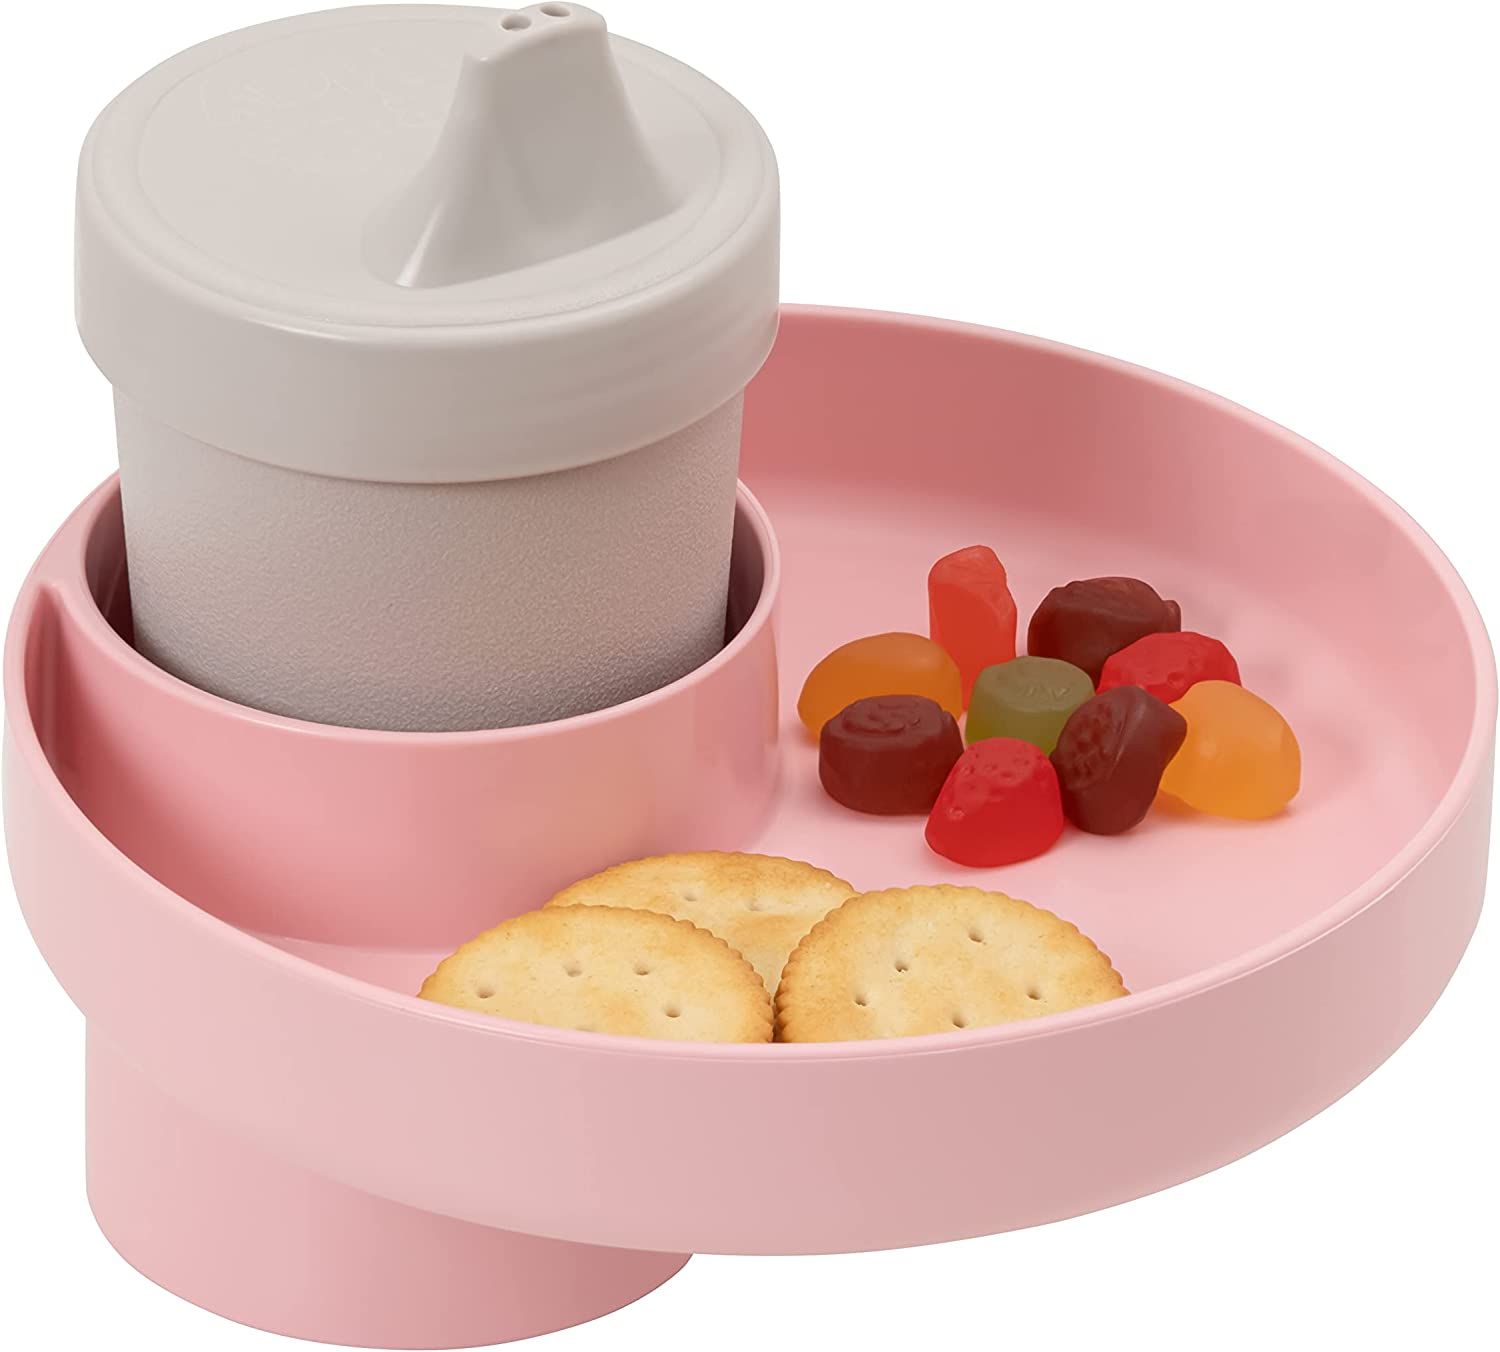 Travel Tray for Cup Holder (Light Pink) - USA Made | Amazon (US)